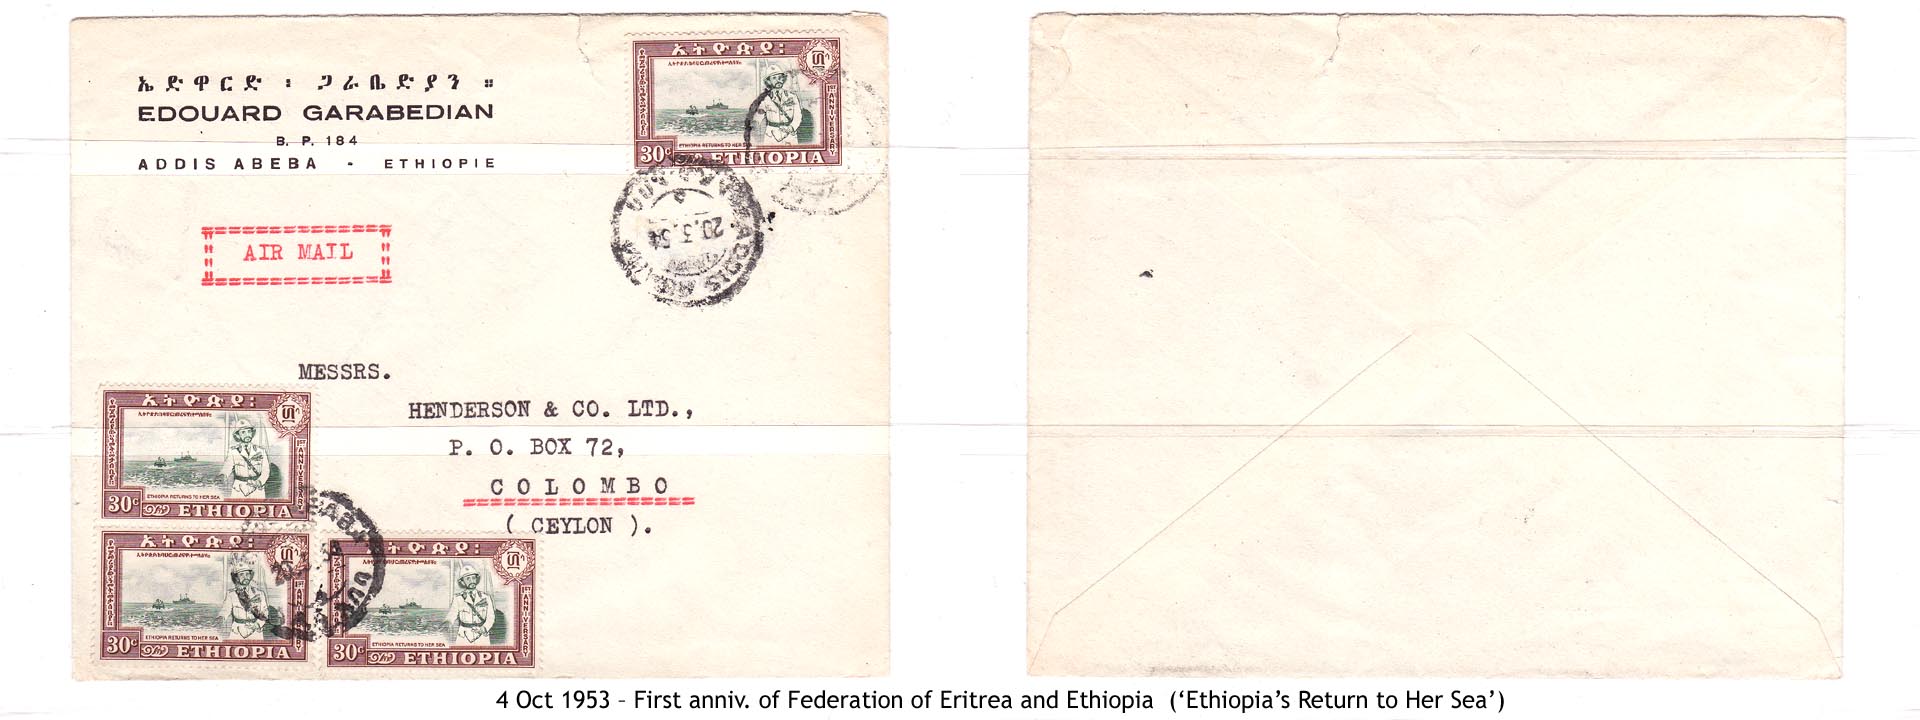 19531004 – First anniv. of Federation of Eritrea and Ethiopia (‘Ethiopia’s Return to Her Sea’)